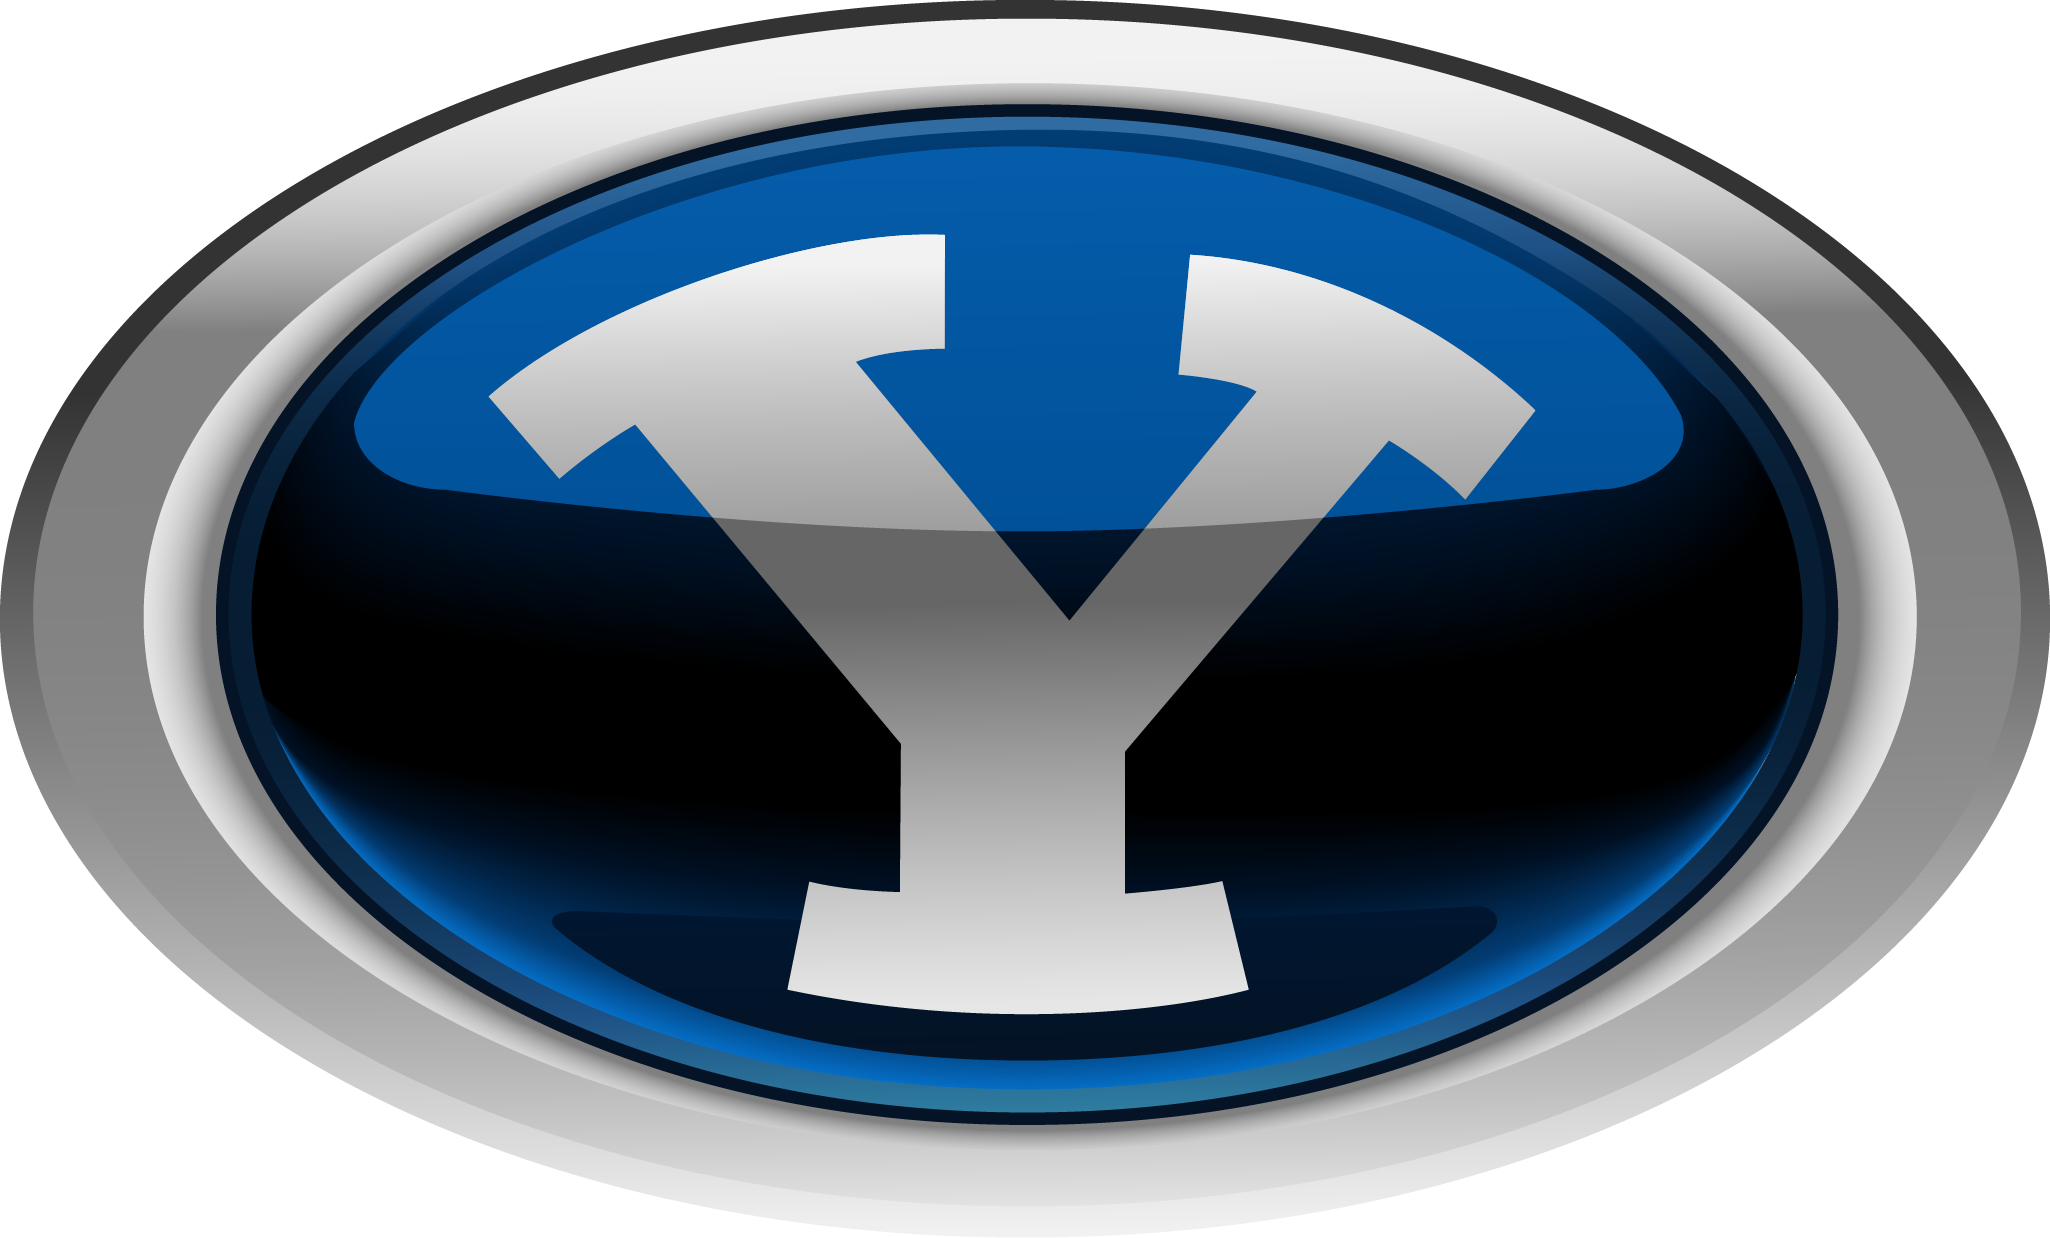 Previewing the nfl playoffs. Logo clipart byu